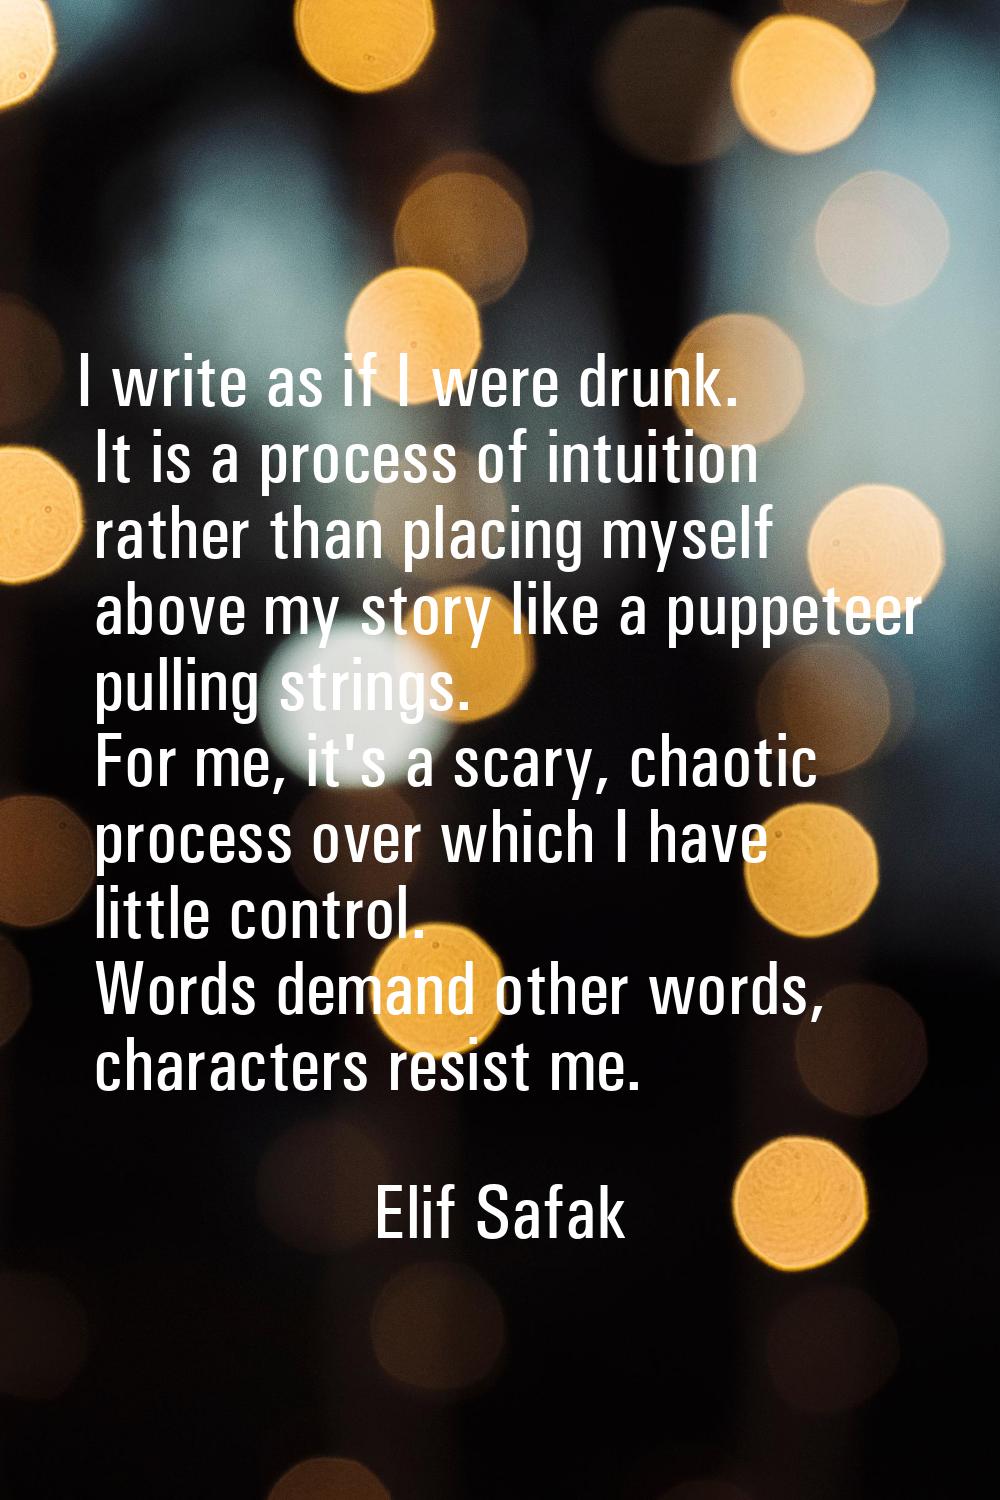 I write as if I were drunk. It is a process of intuition rather than placing myself above my story 